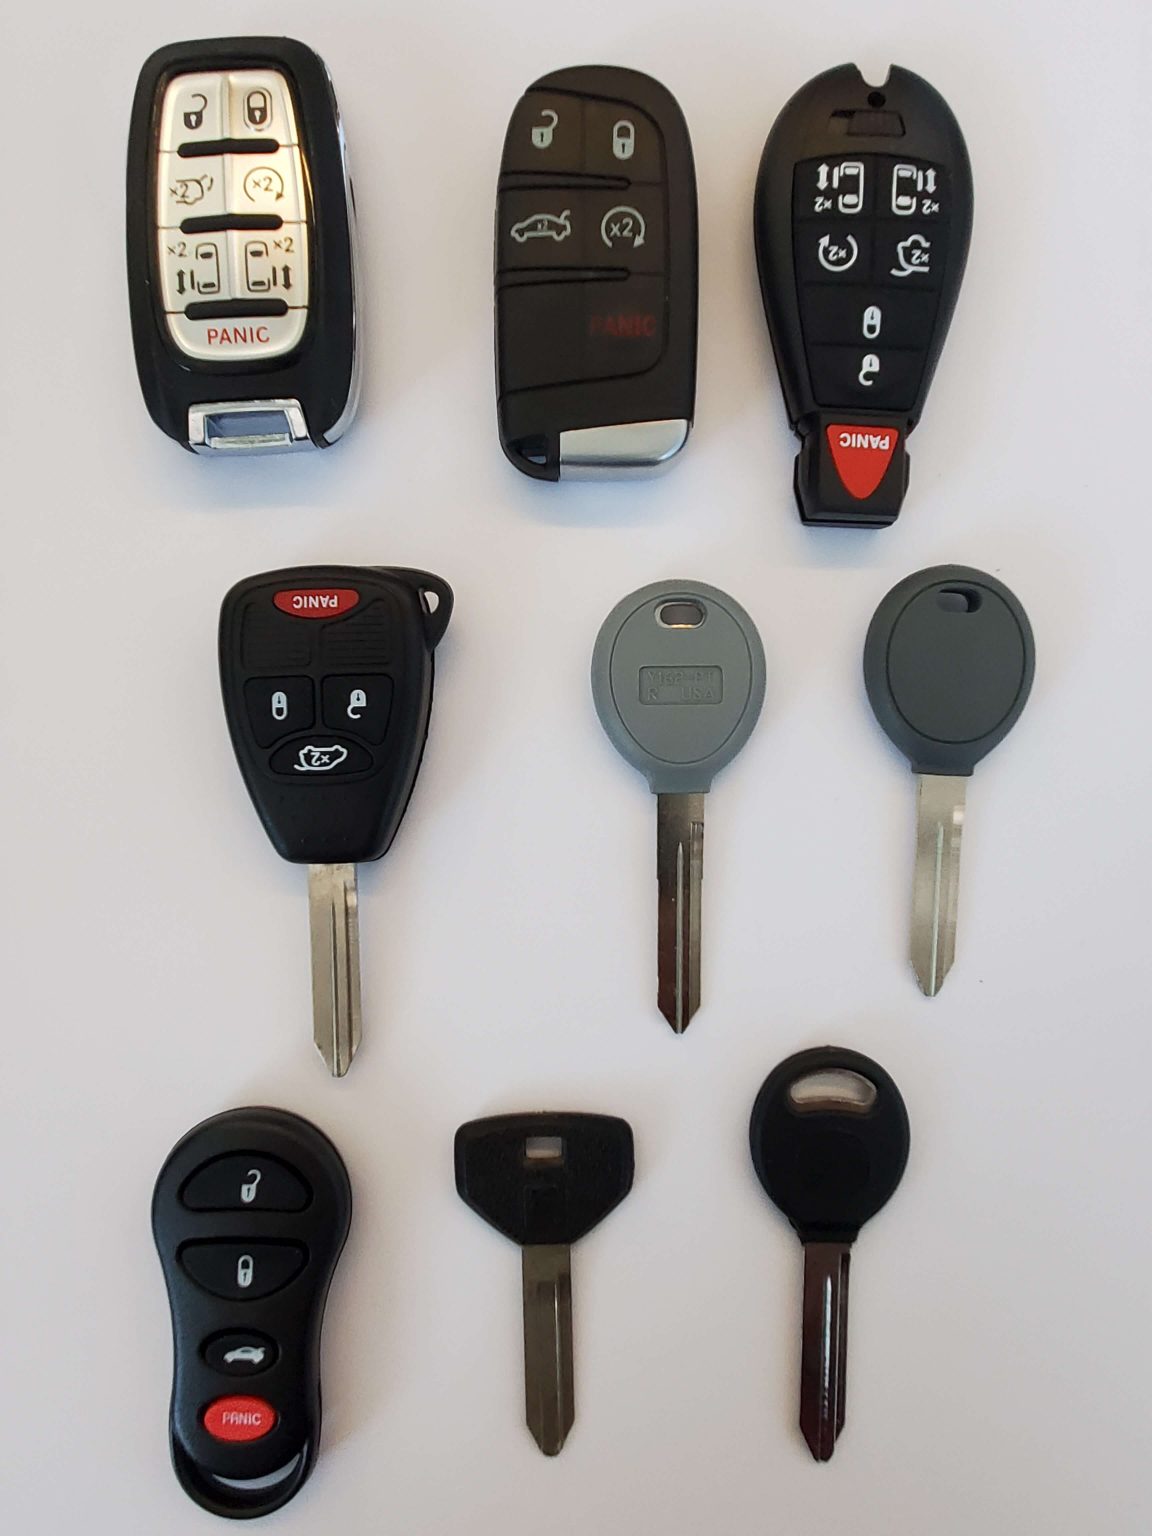 Lost Chrysler Key Replacement - What To Do, Costs, Tips & More